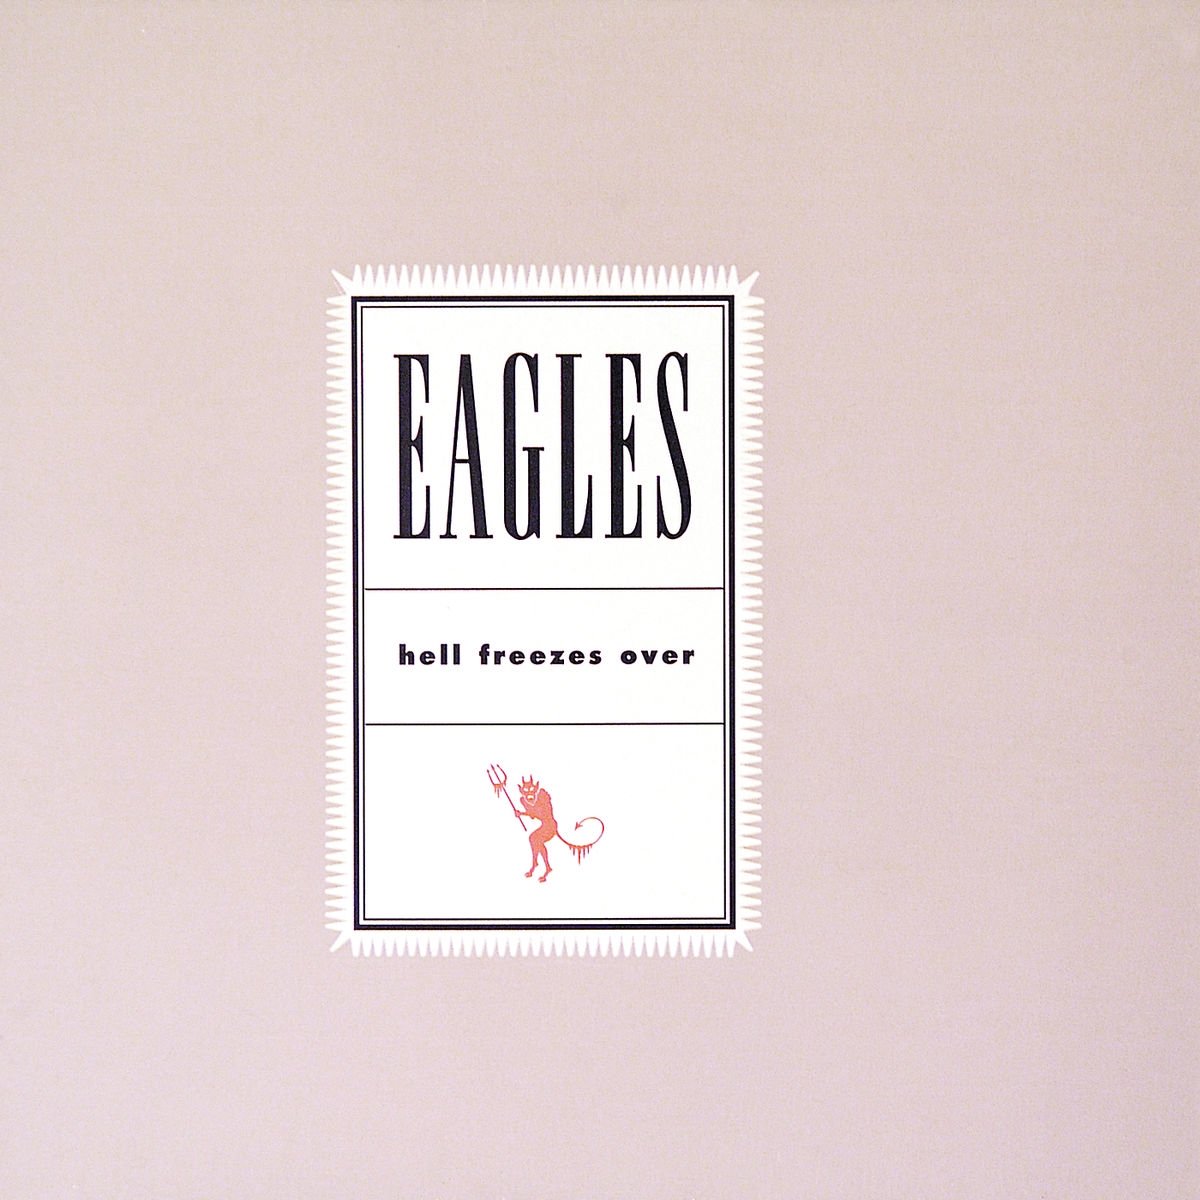 Hell Freezes Over | Eagles